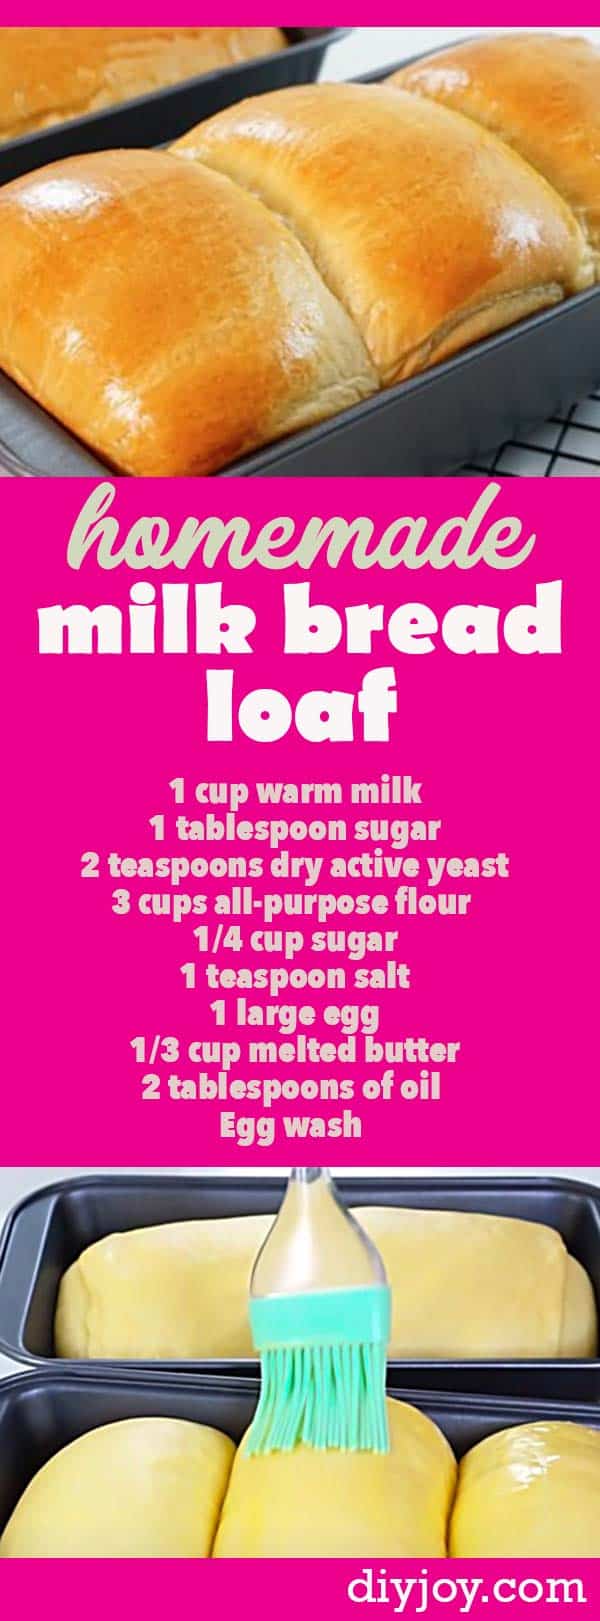 How to Make Milk Bread - Recipe for Making a Loaf of Bread - Easy Bread Recipes for Beginners